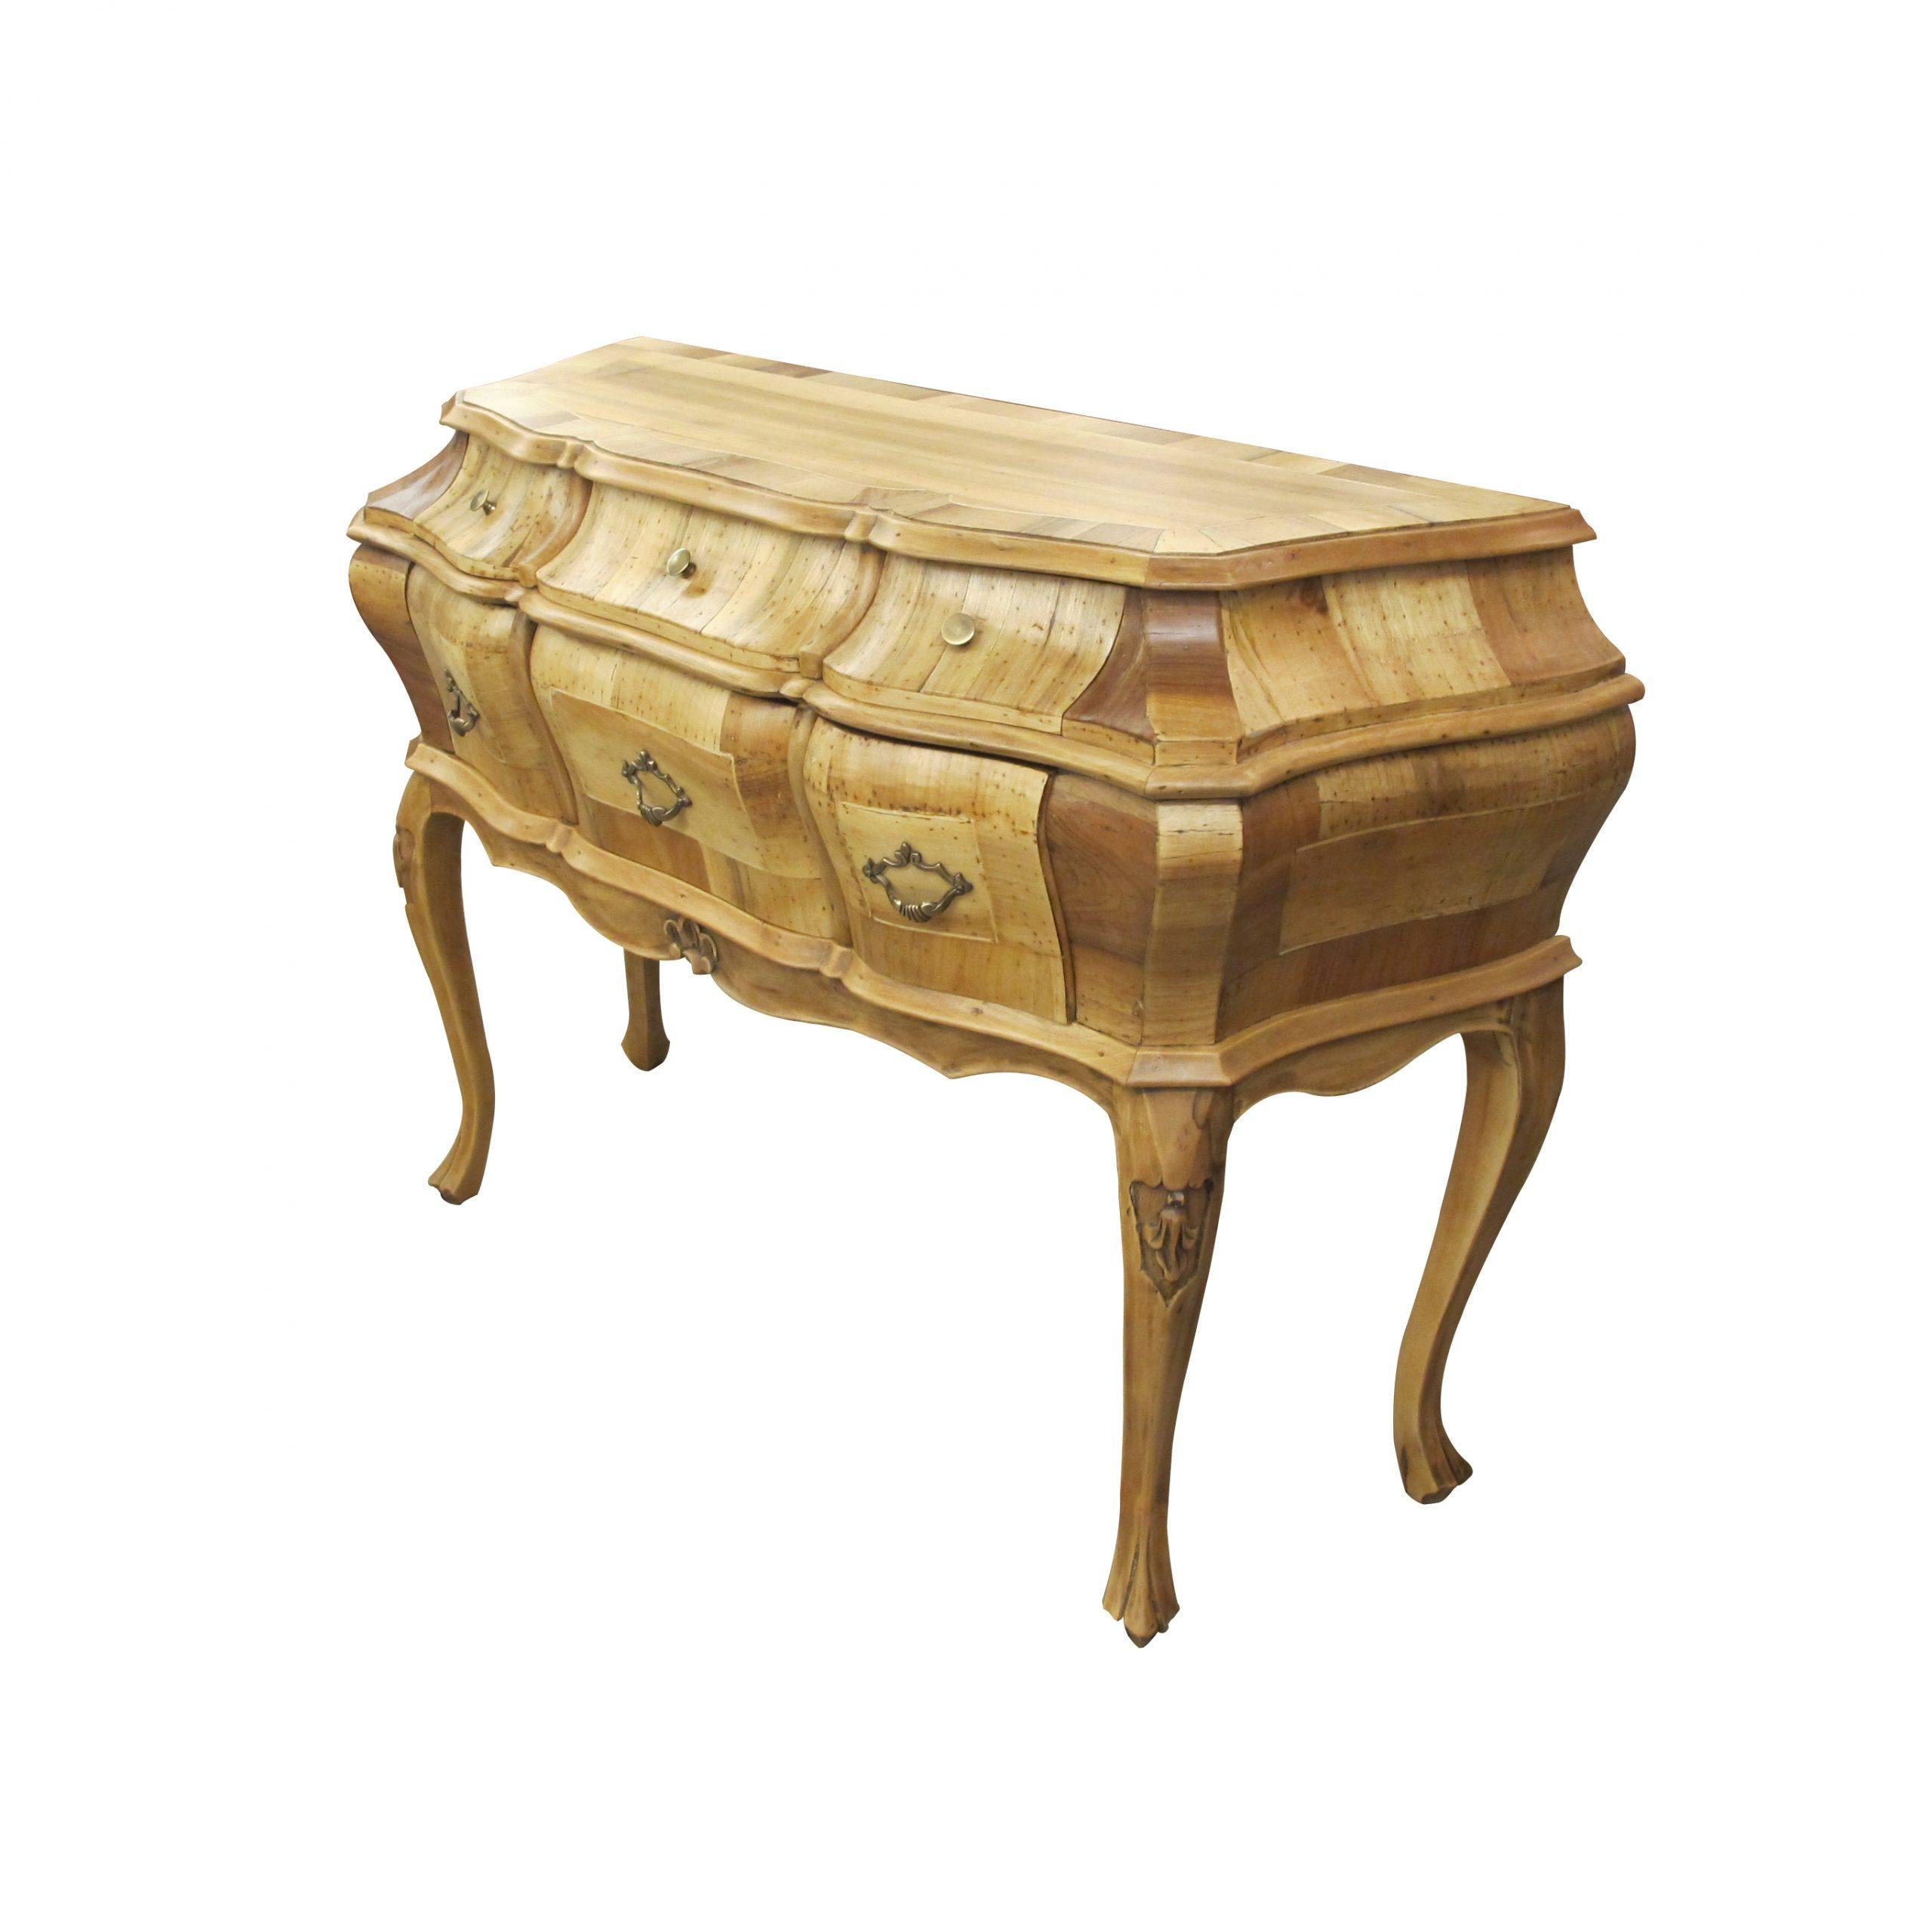 A rare 1930s Italian Baroque style bombé chest of drawers with burl olive wood and burl walnut marquetry featuring its original Art Nouveau brass handles. There are three flat brass knobs on the top set of drawers and three brass drawer pulls on the